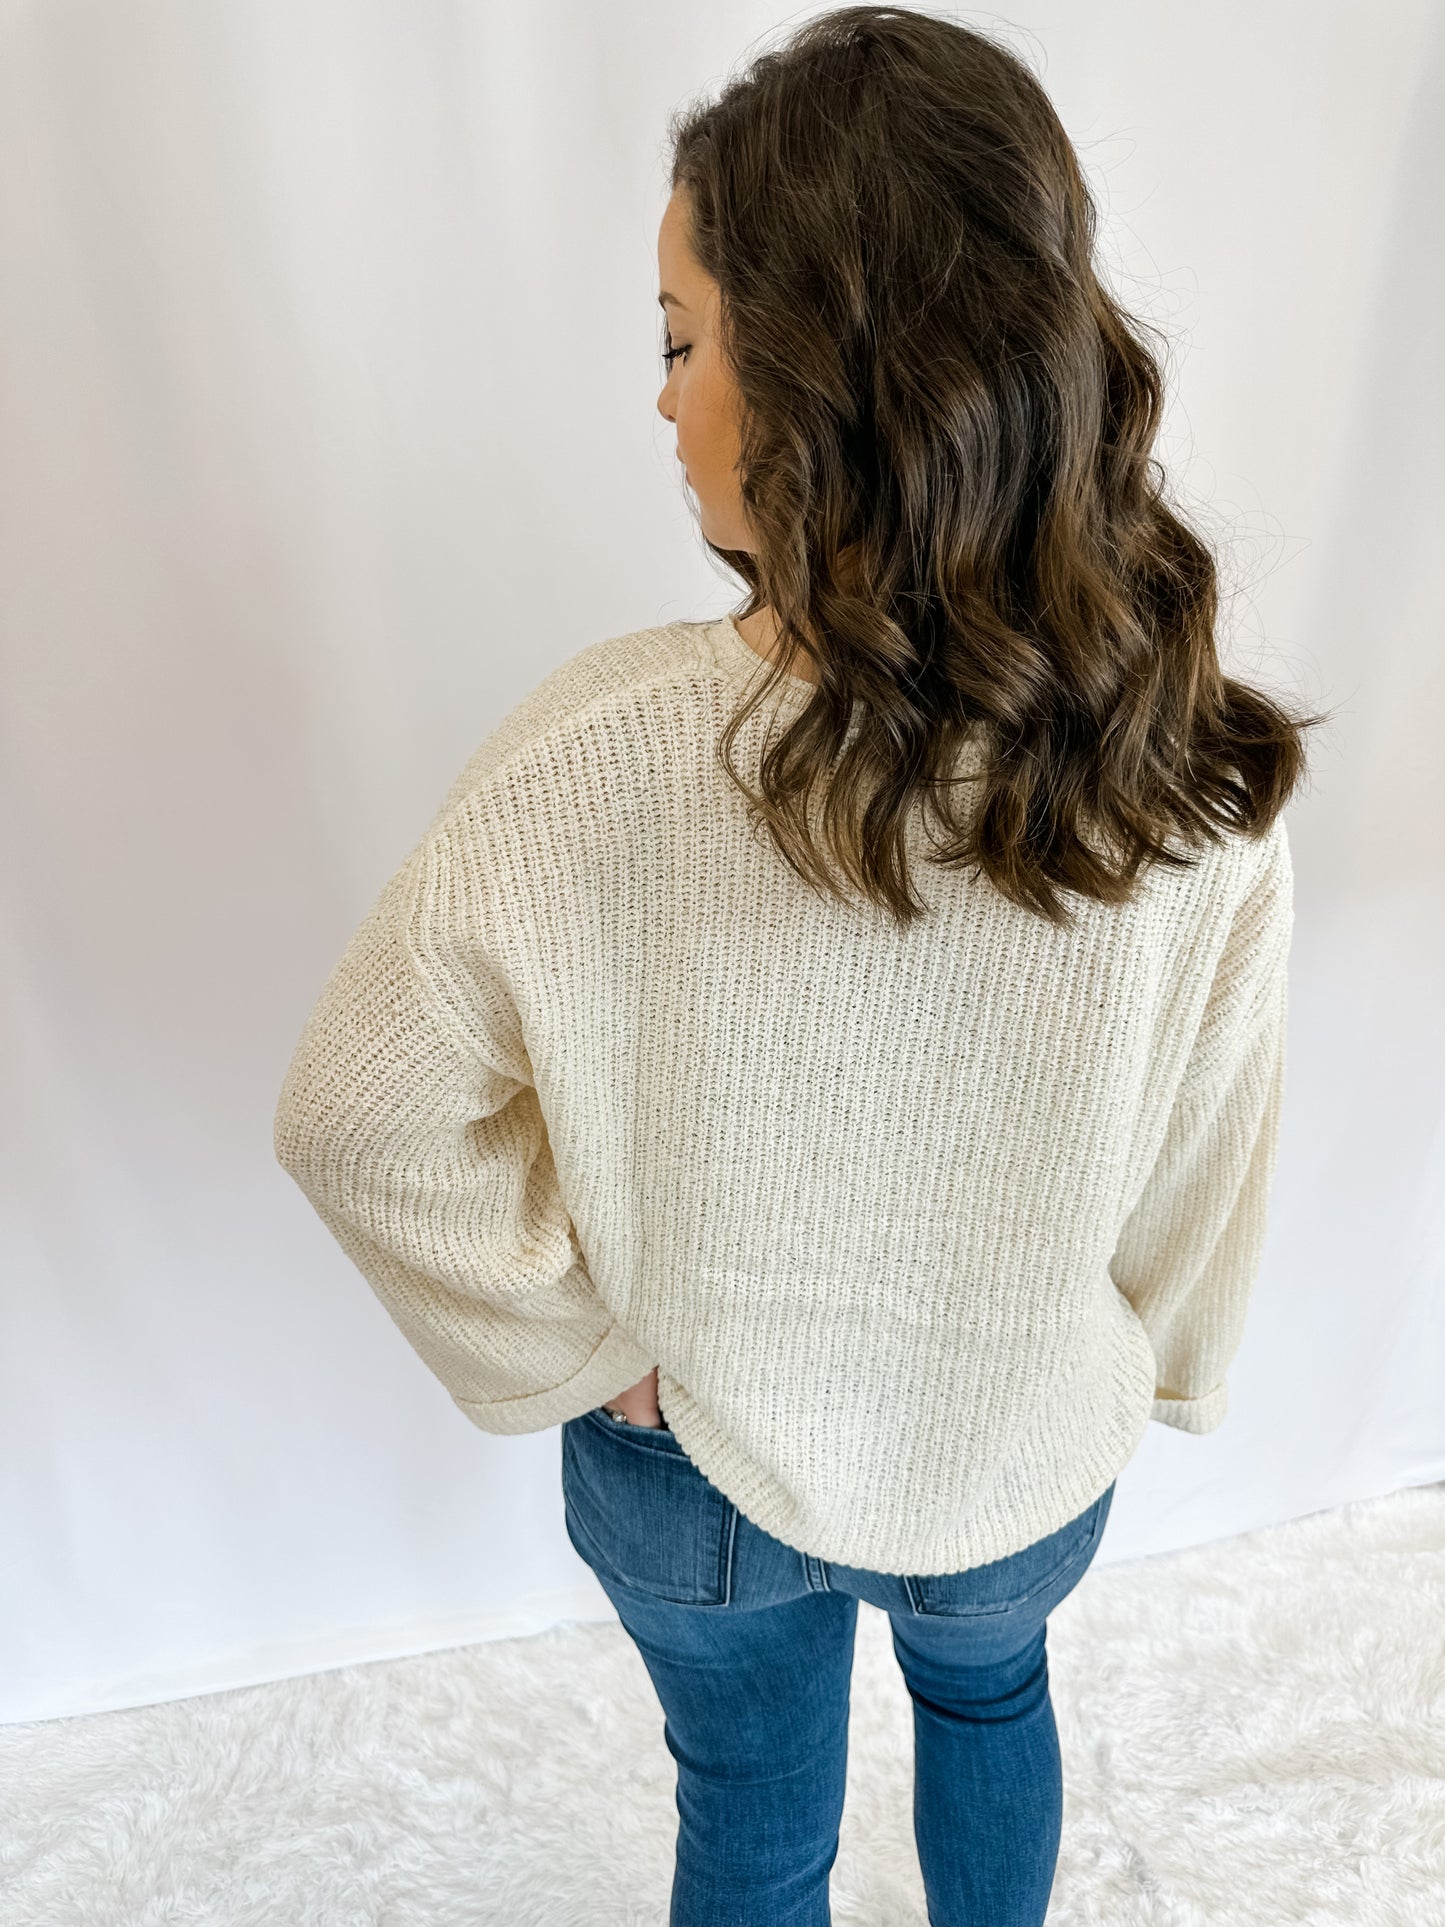 Cherished Time Knit Top